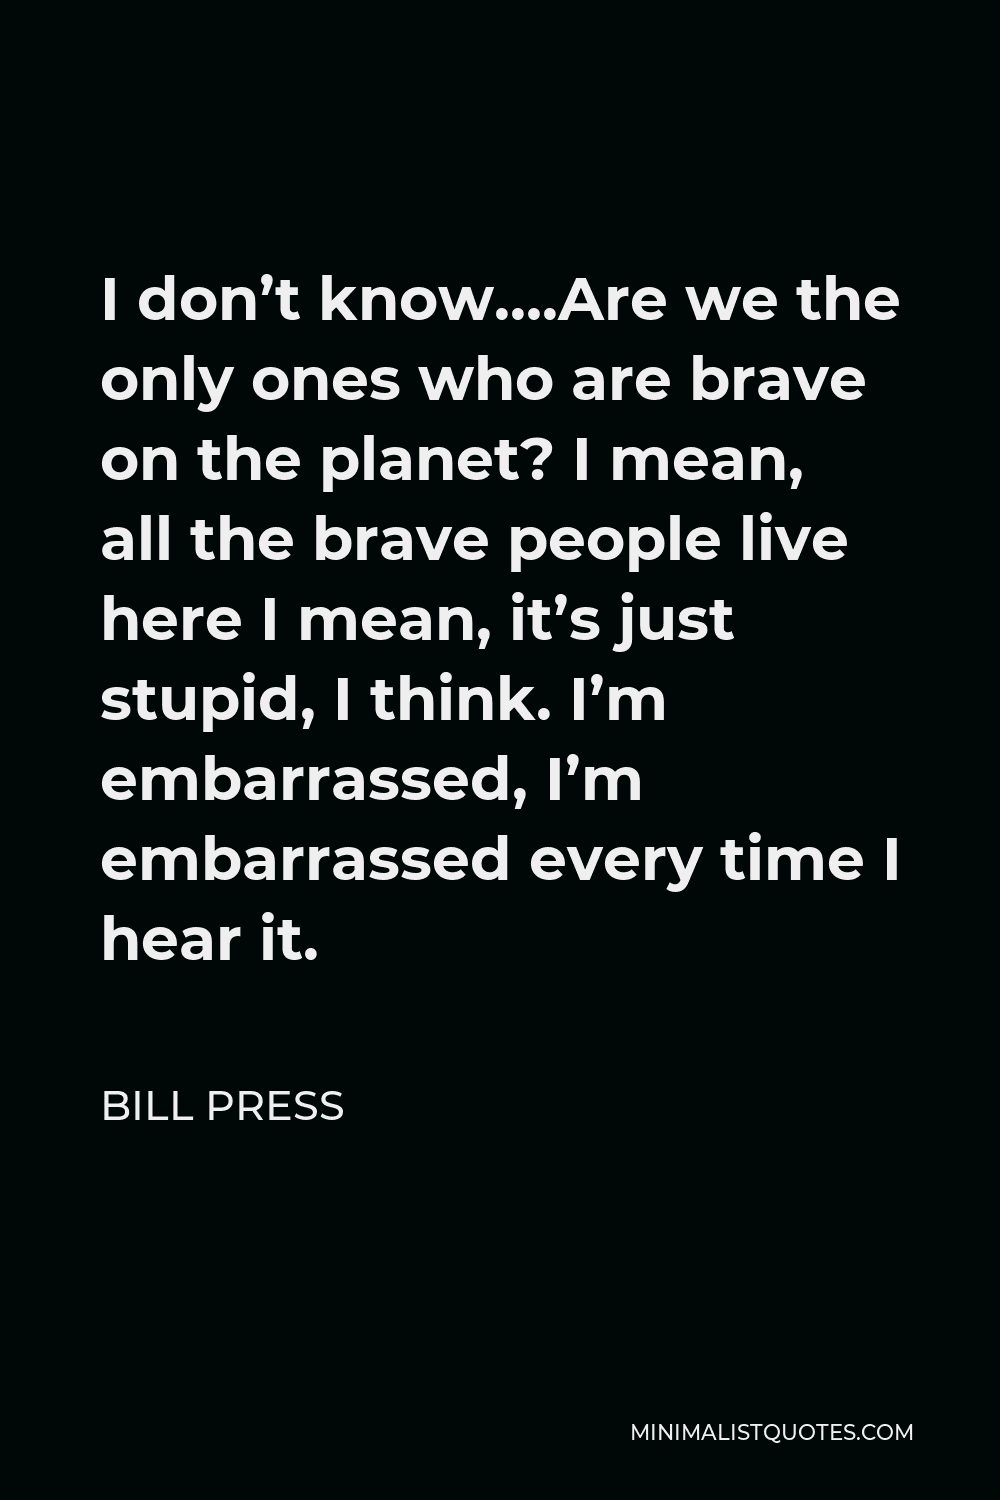 Bill Press Quote - I don’t know….Are we the only ones who are brave on the planet? I mean, all the brave people live here I mean, it’s just stupid, I think. I’m embarrassed, I’m embarrassed every time I hear it.